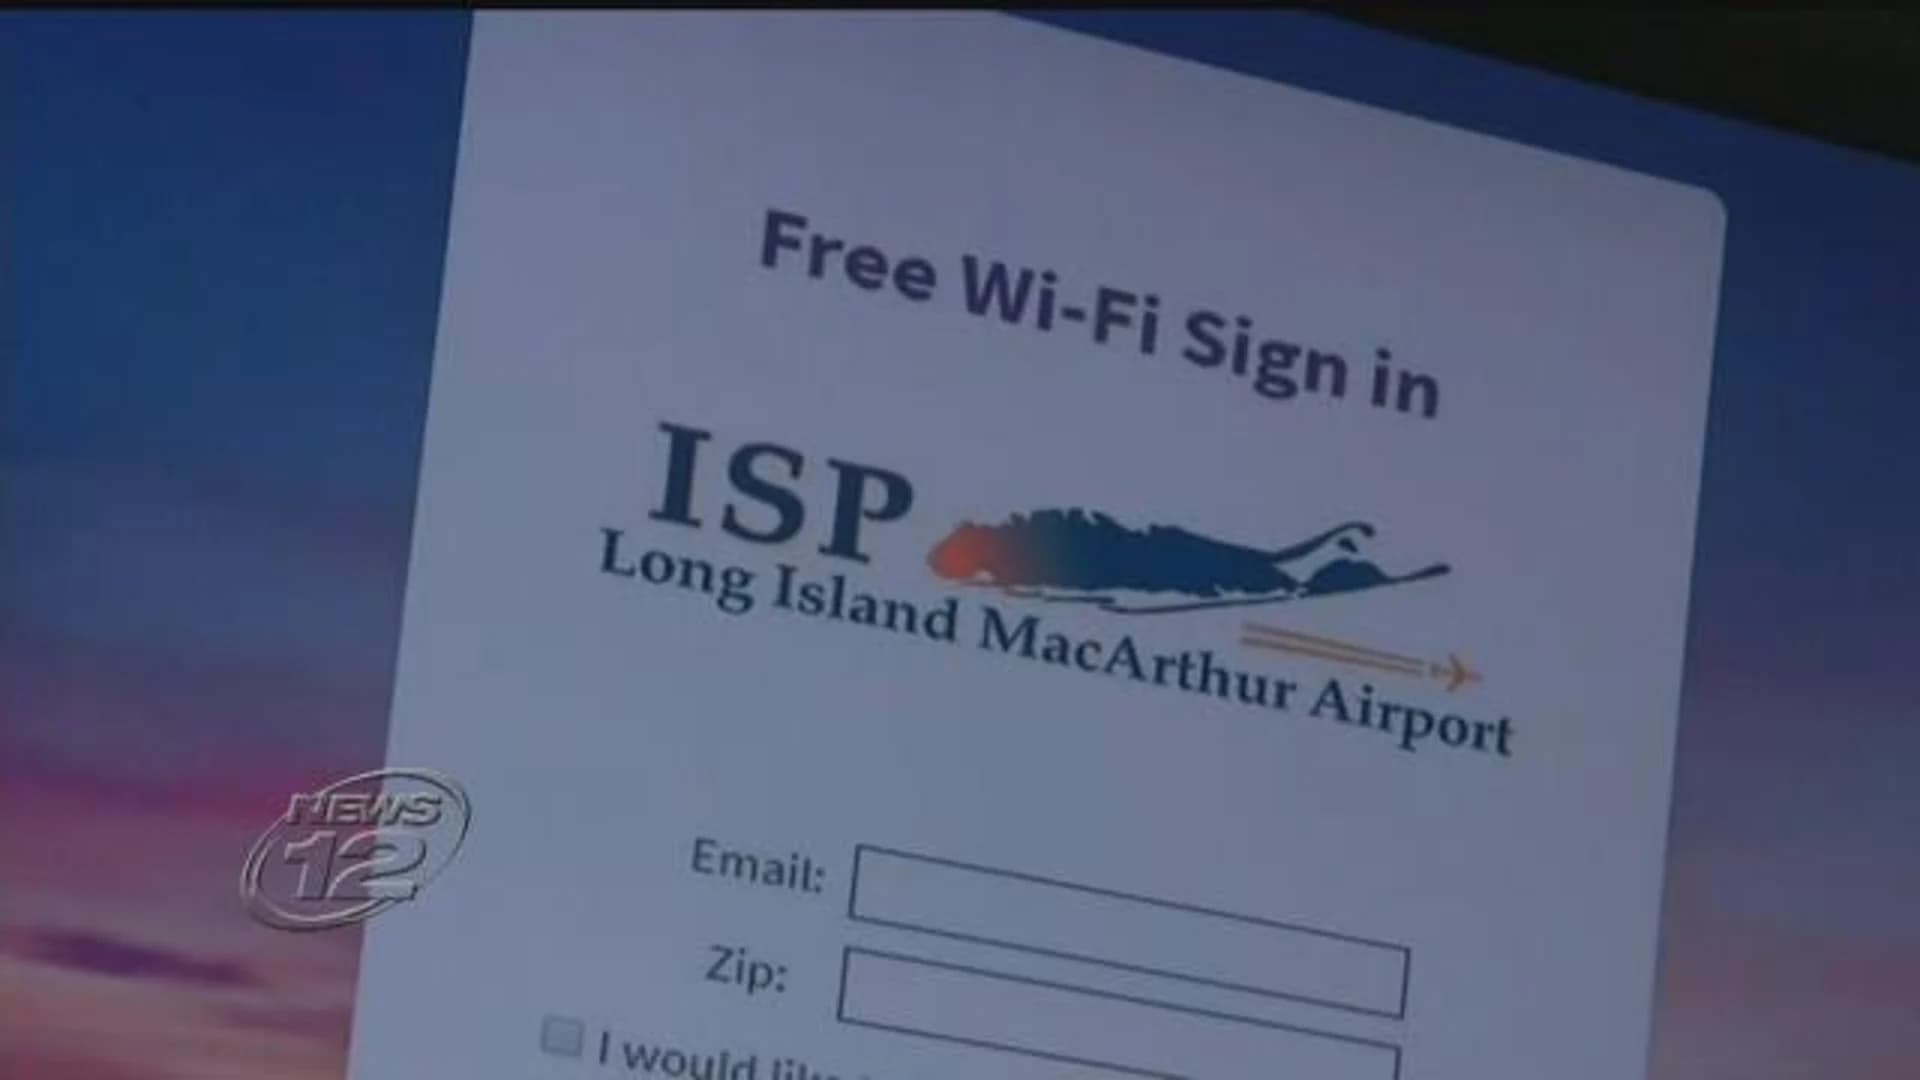 MacArthur airport rolls out free Wi-Fi at terminal